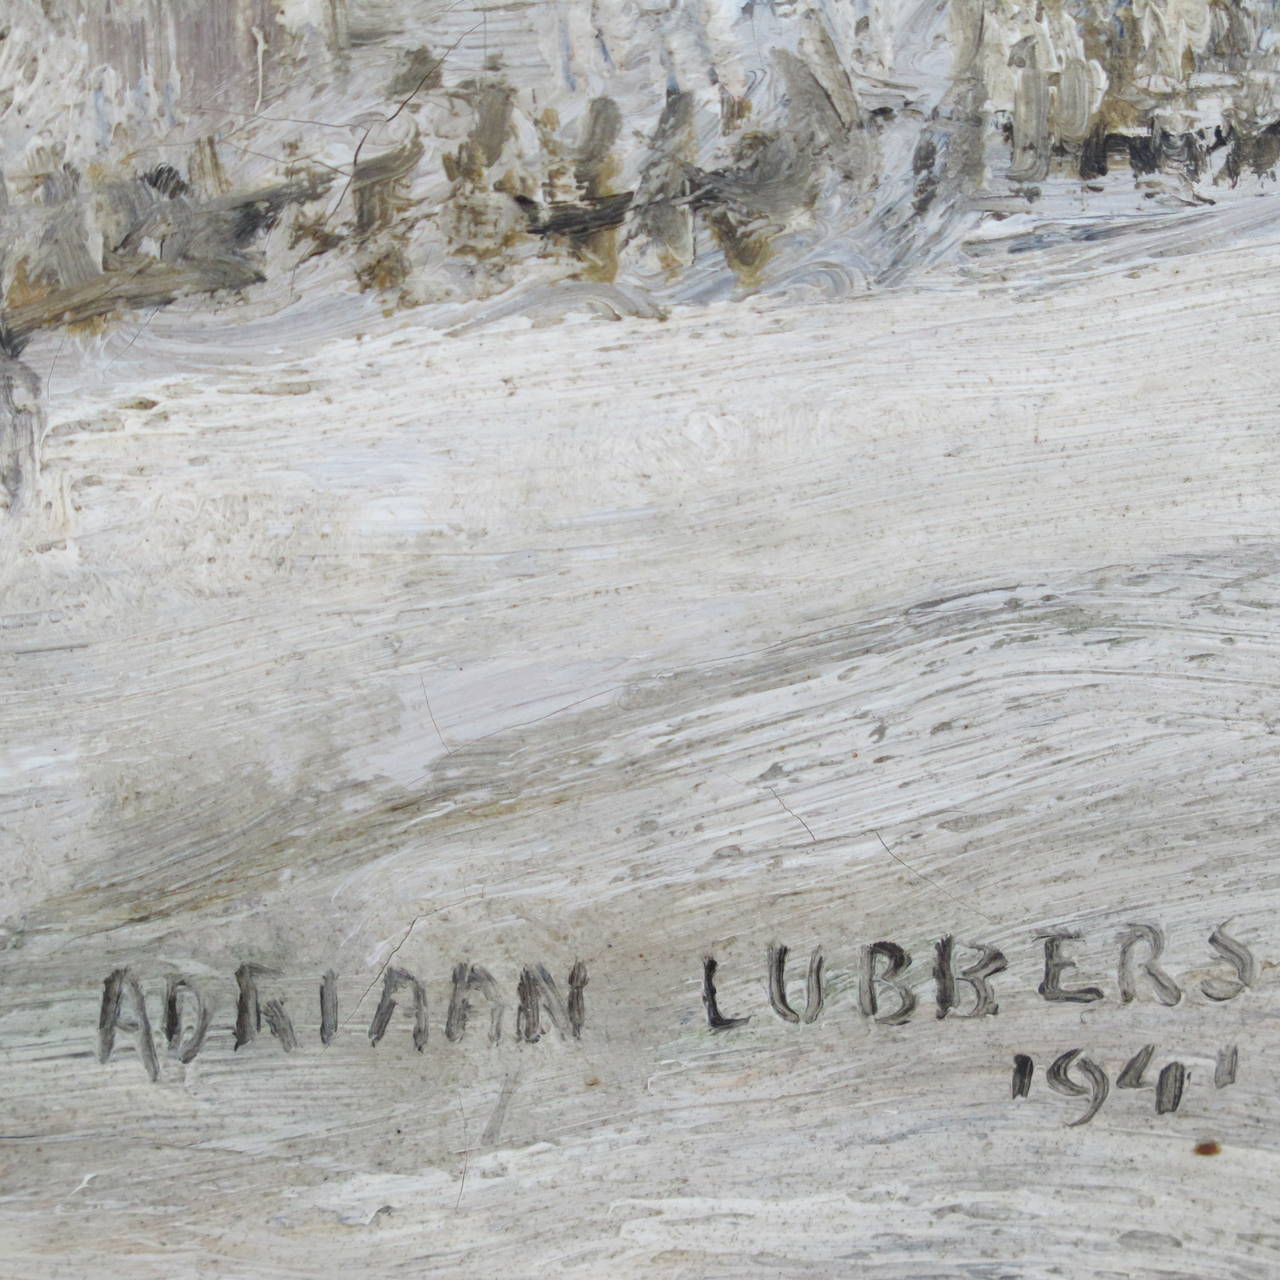 Adrian Lubbers 